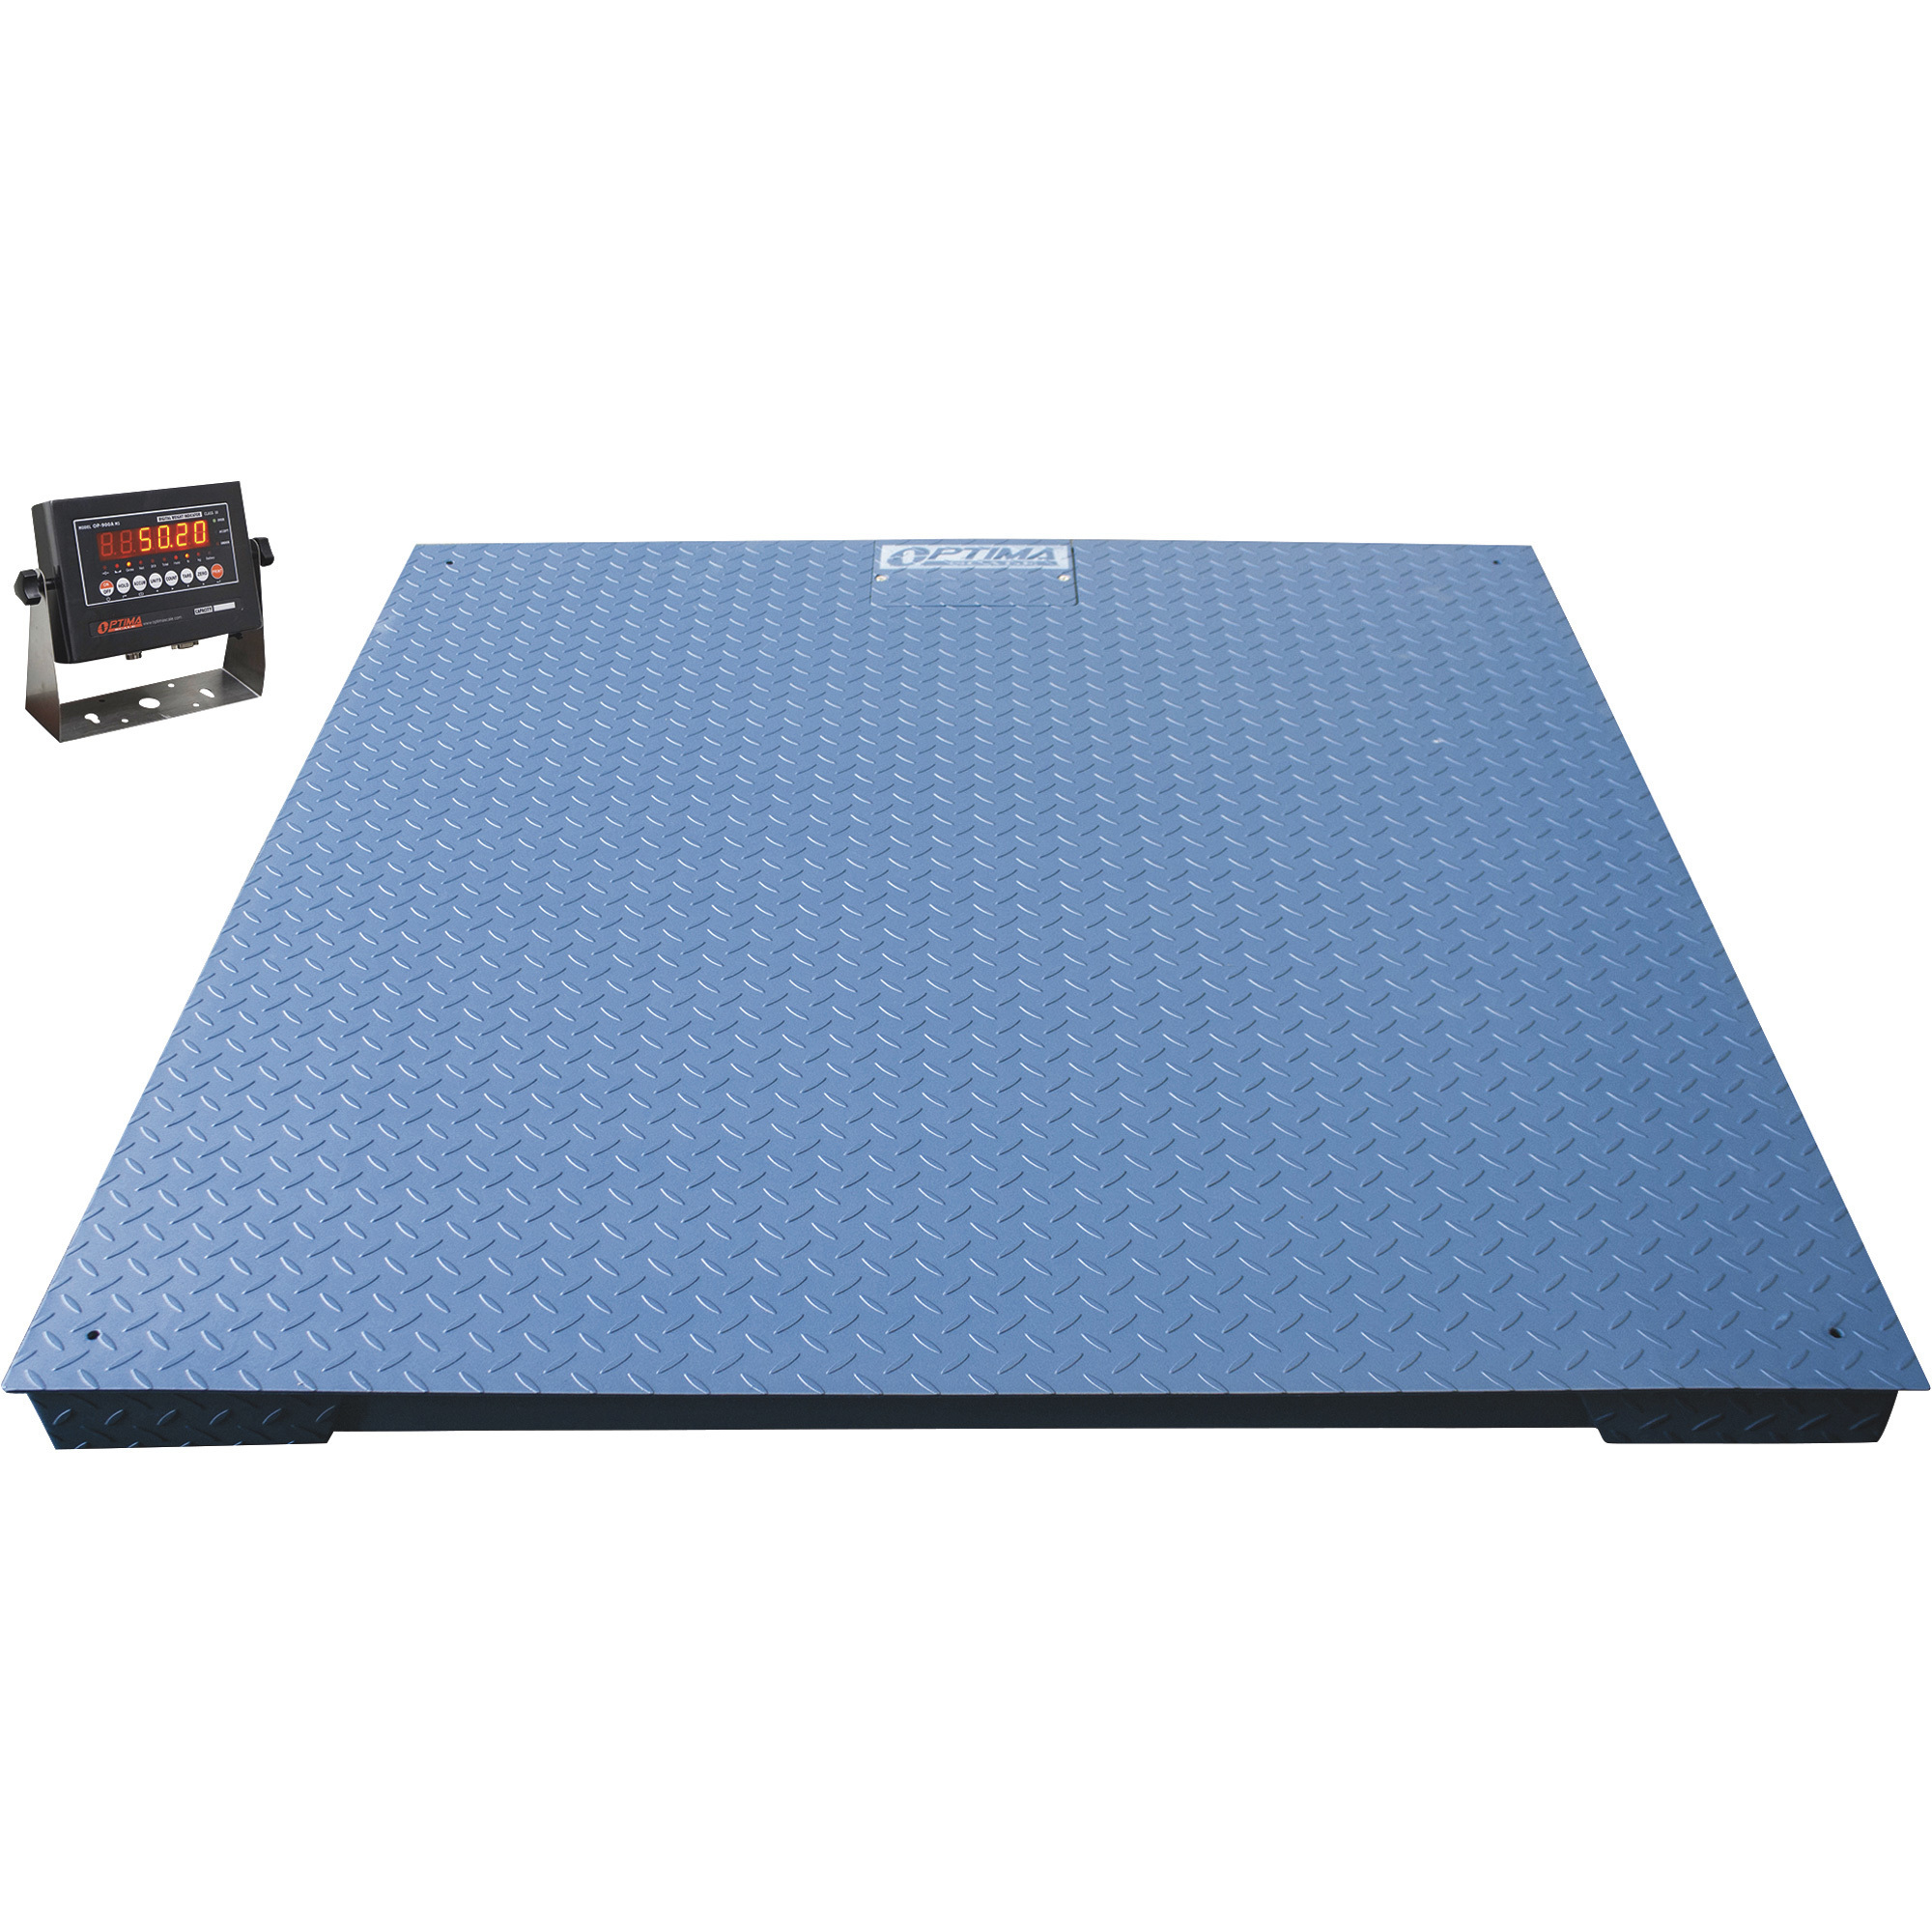 Optima Scale 72Inch x 48Inch Industrial Floor Scale — 5000-Lb. Weight Capacity, 1-lb. Display Increments, Model OP-916-4X6-5K -  OptimaScale